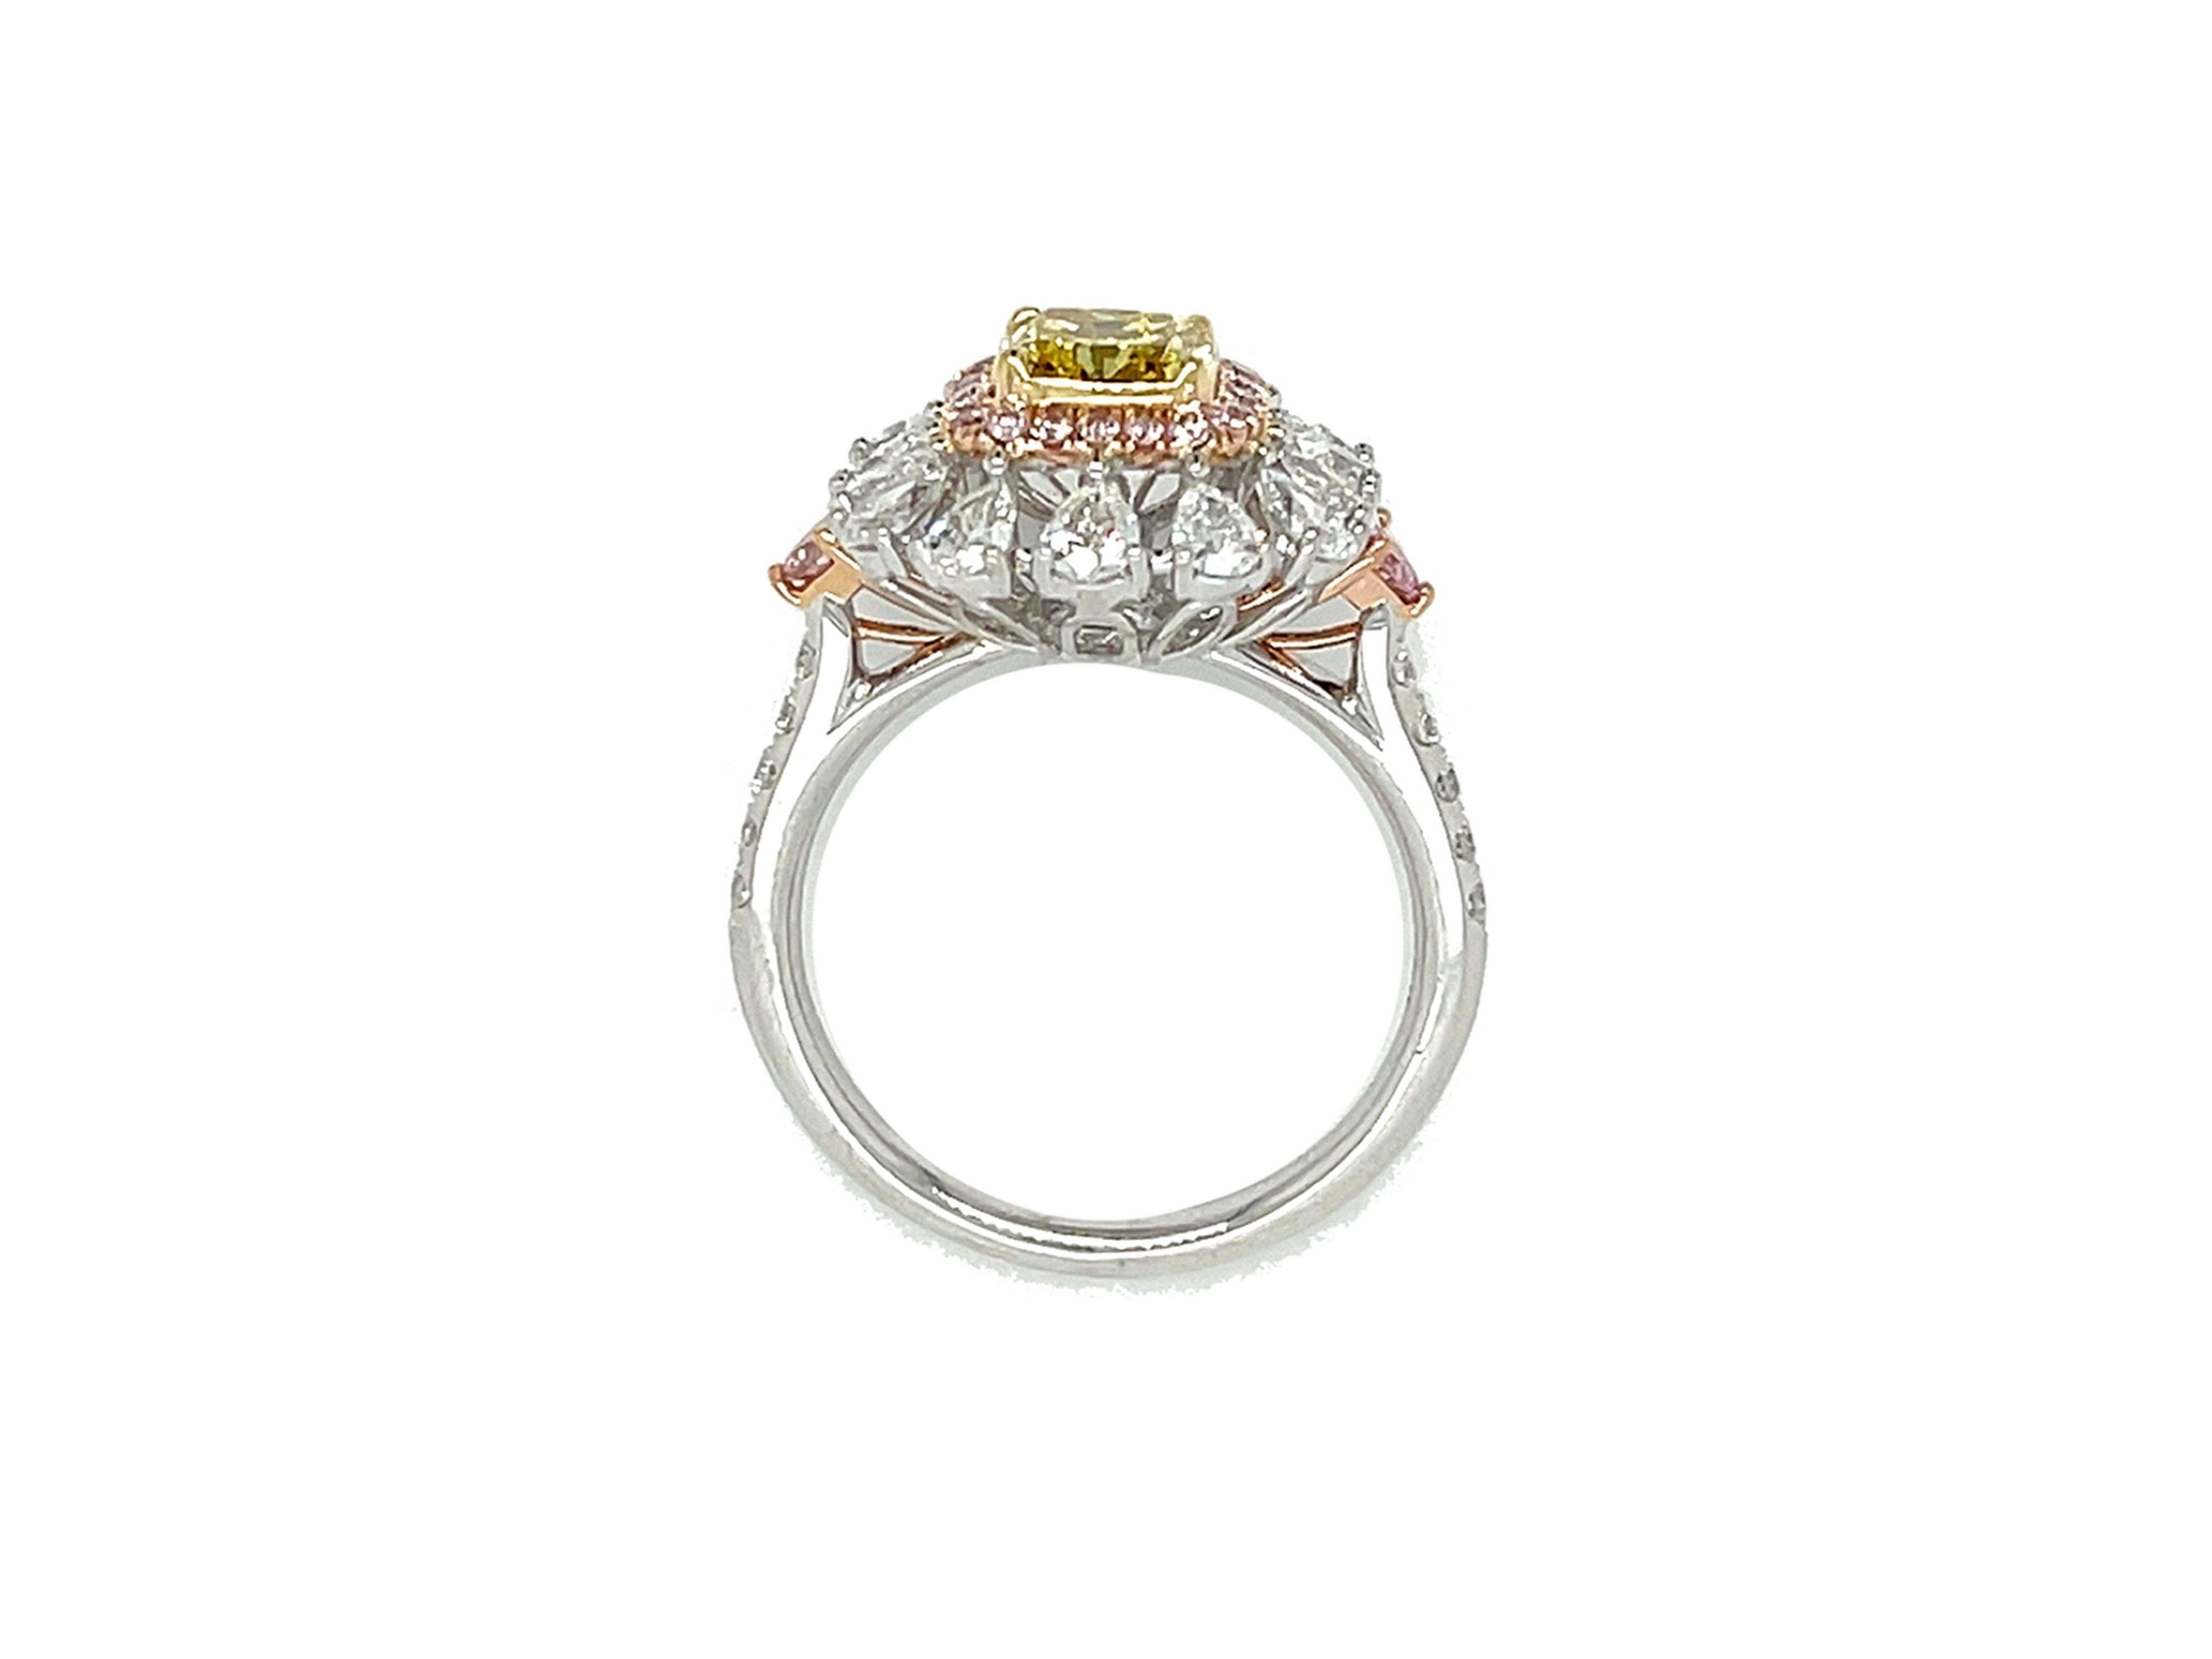 Radiant Cut 1 Carat Fancy Vivid Yellow Diamond Engagement Cocktail Ring, GIA Certified 18K G For Sale